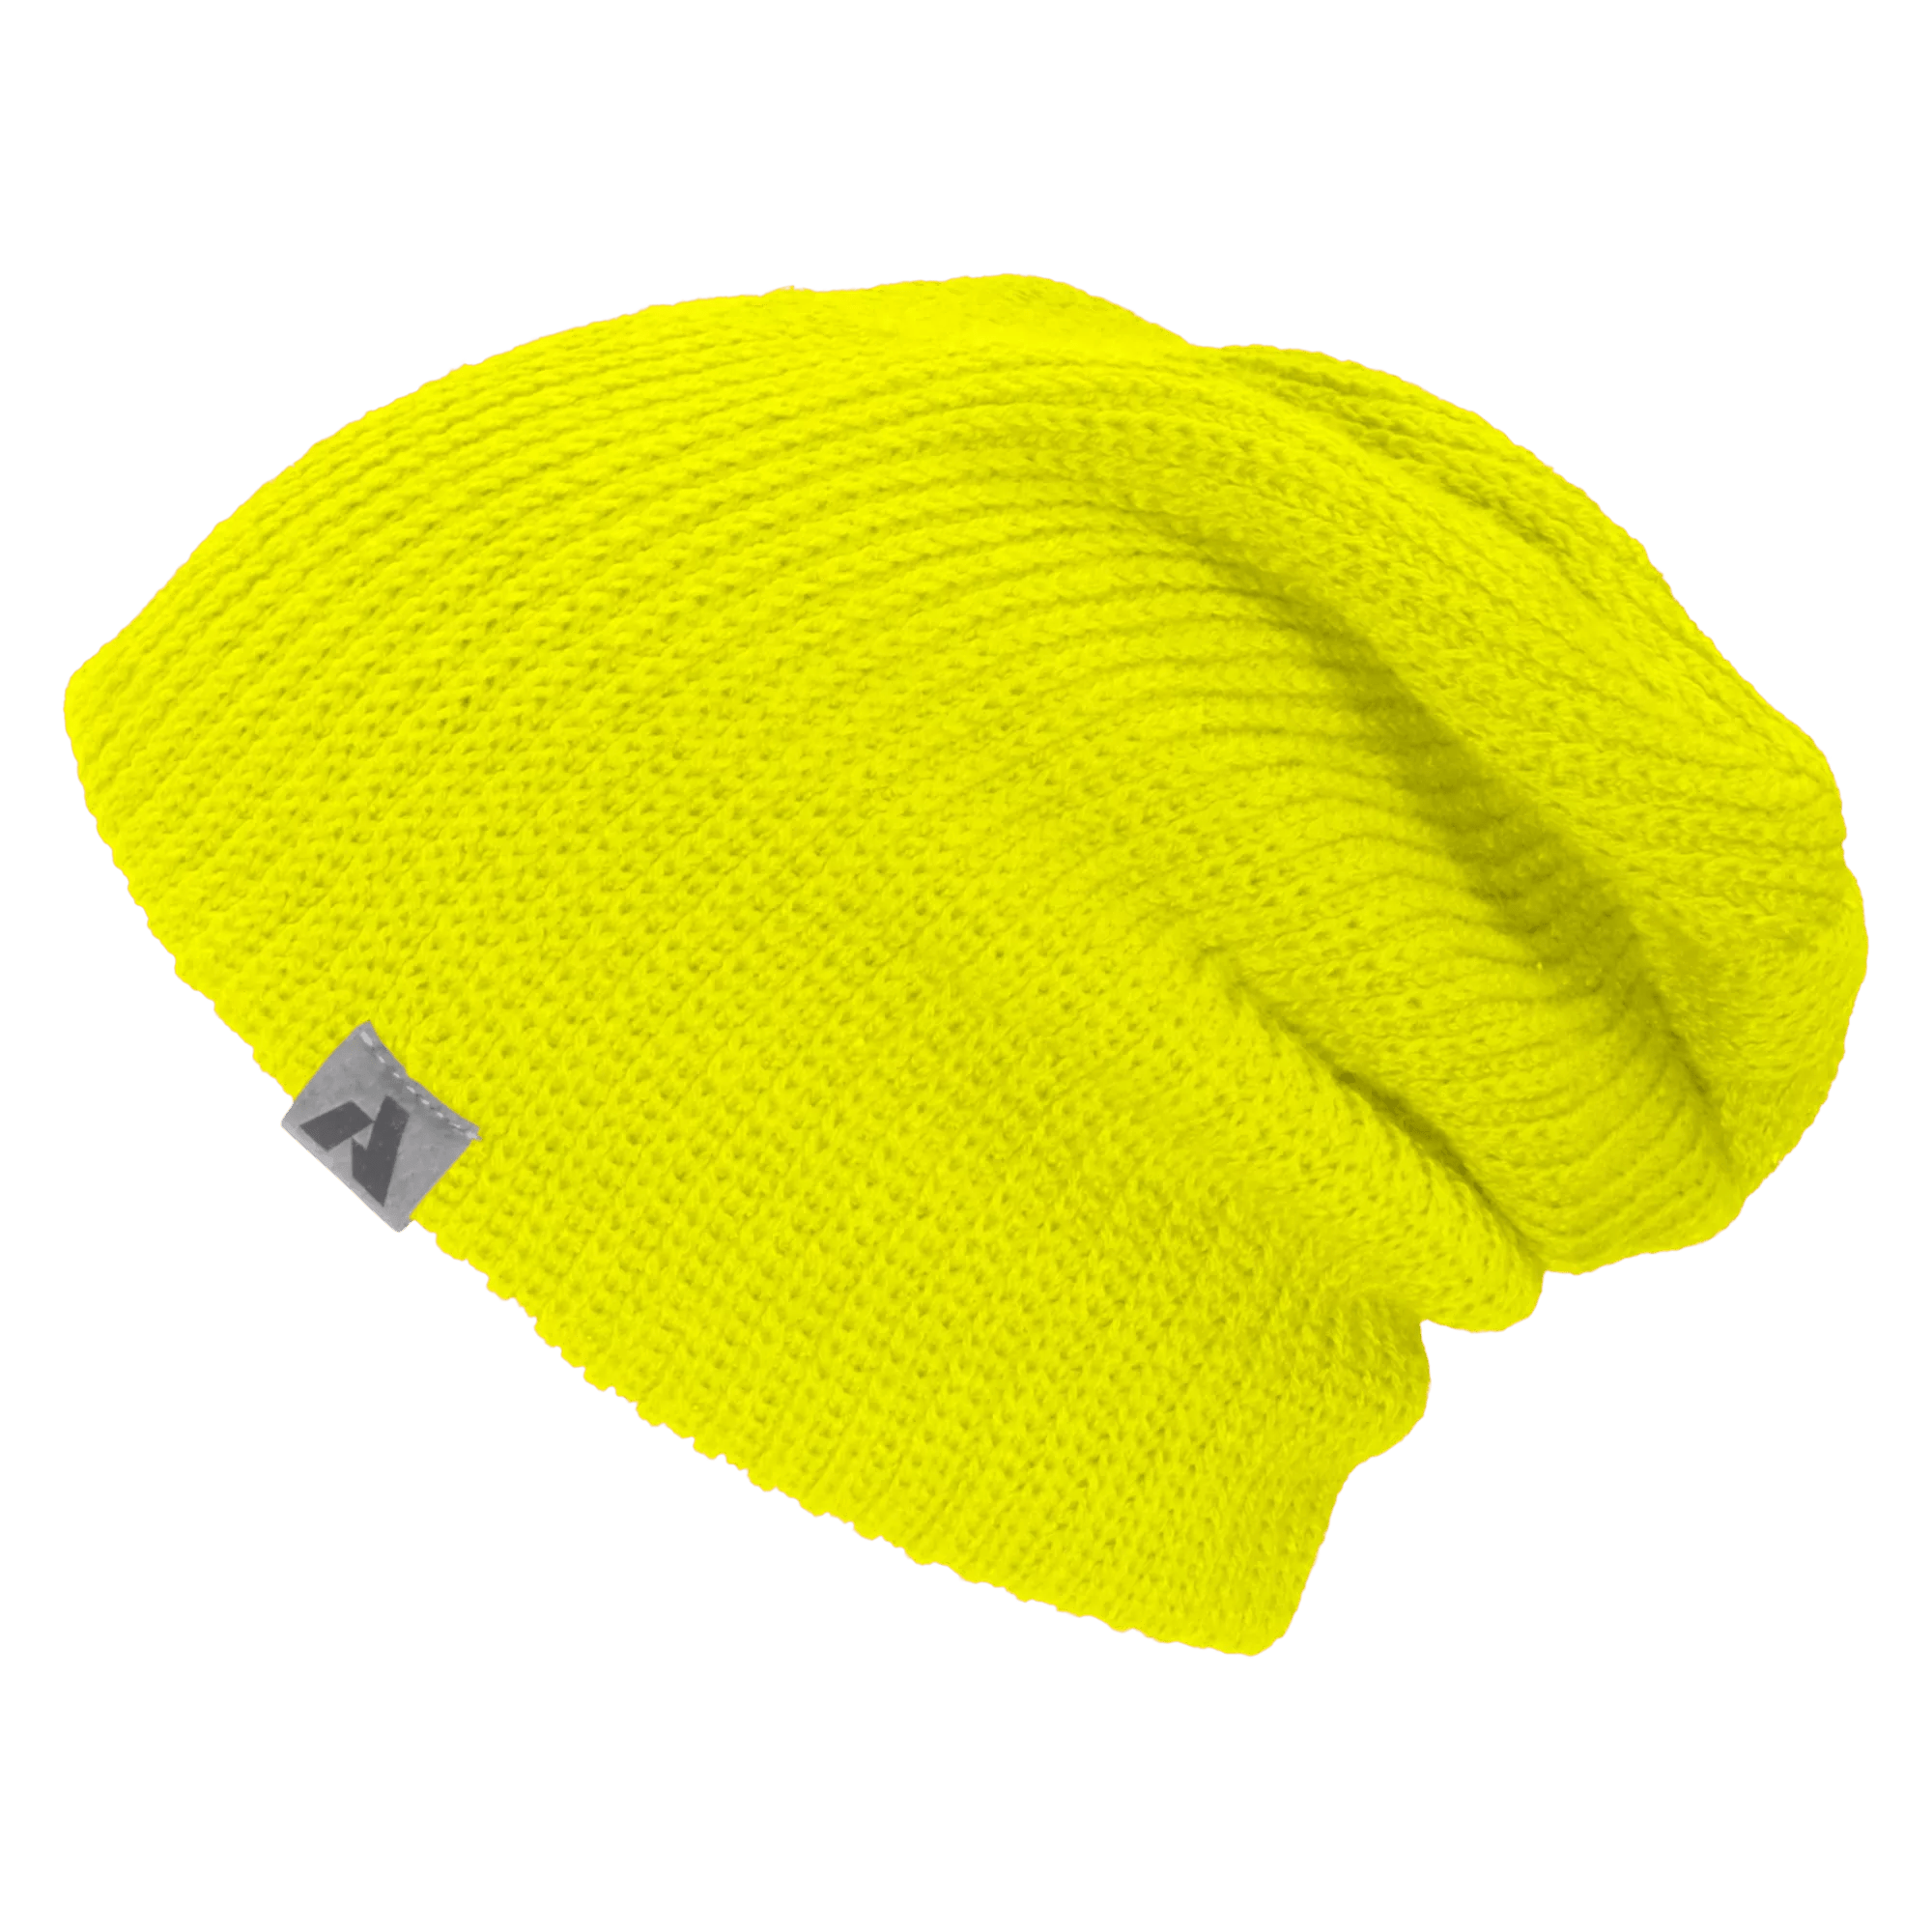 First Ascent Slouch Beanie